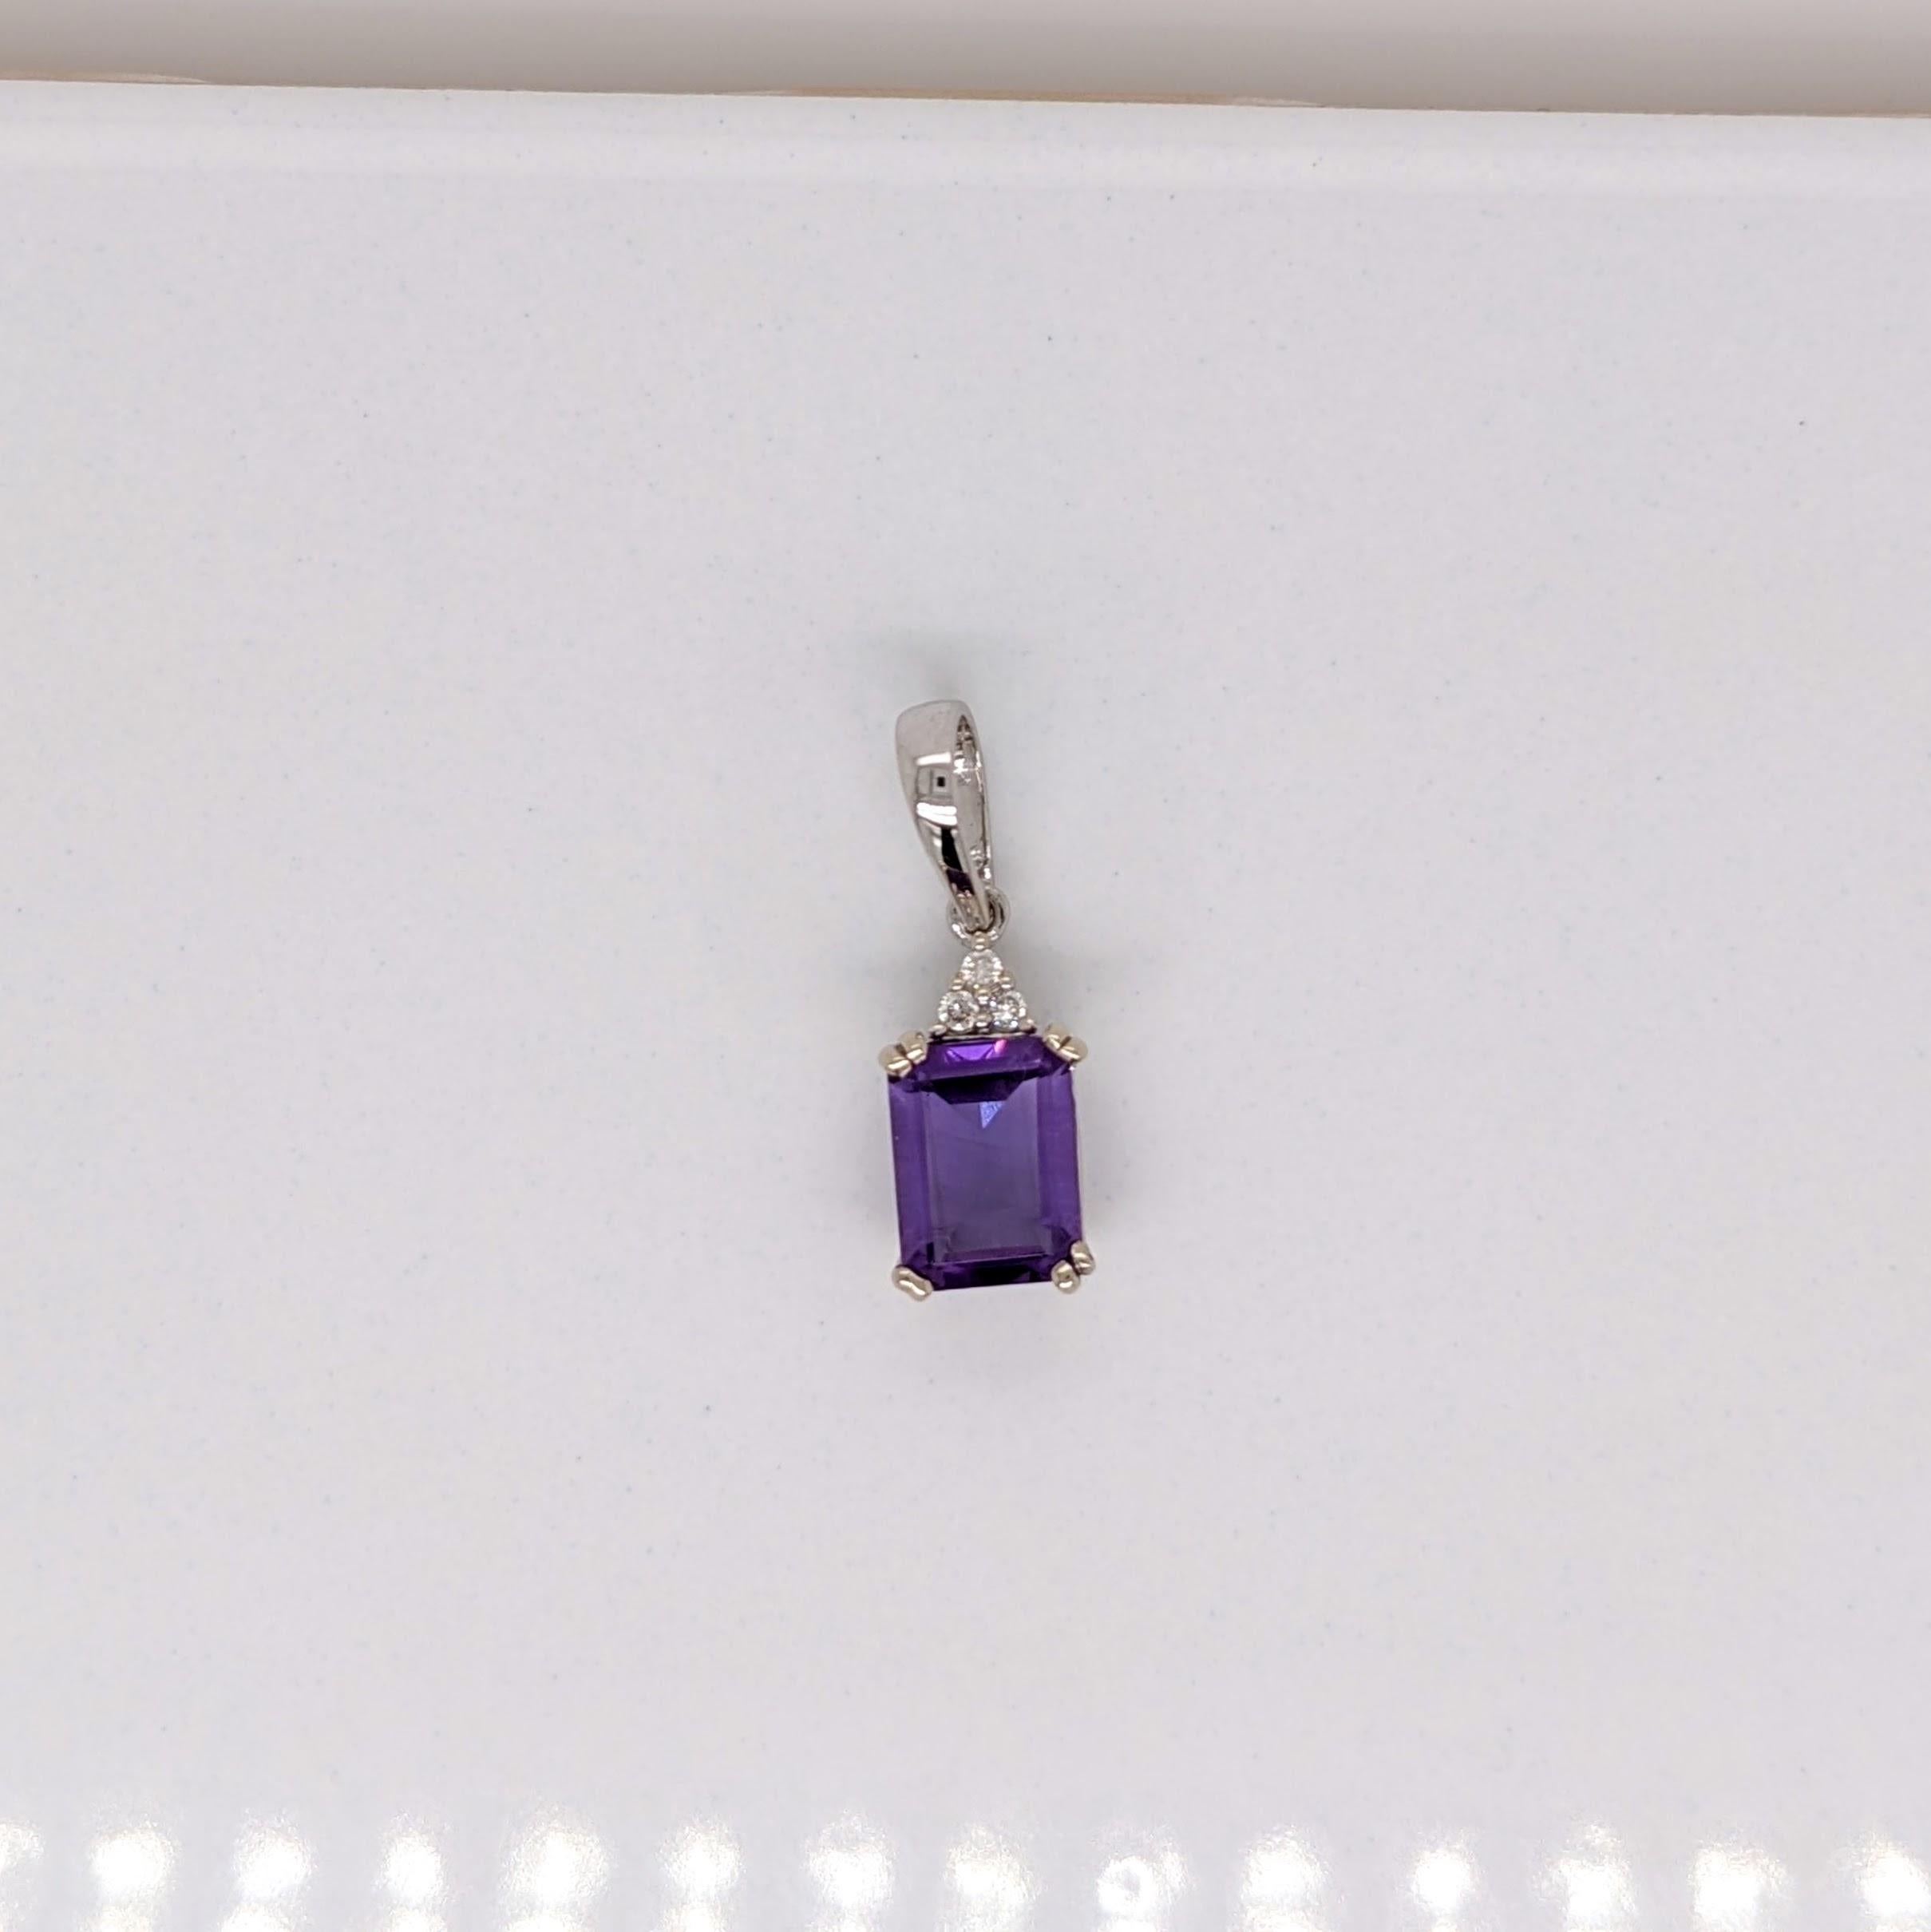 Specifications:

Item Type: Pendant
Center Stone: Amethyst
Treatment: Heated
Weight: 1.99ct
Head size: 8x6mm
Cut: Emerald
Hardness: 7
Origin: Zambia

Metal: 14k/1.01g
Diamonds SI/GH: 3/0.06 cttw

Sku: AJP140/1004

This pendant is made with solid 14k